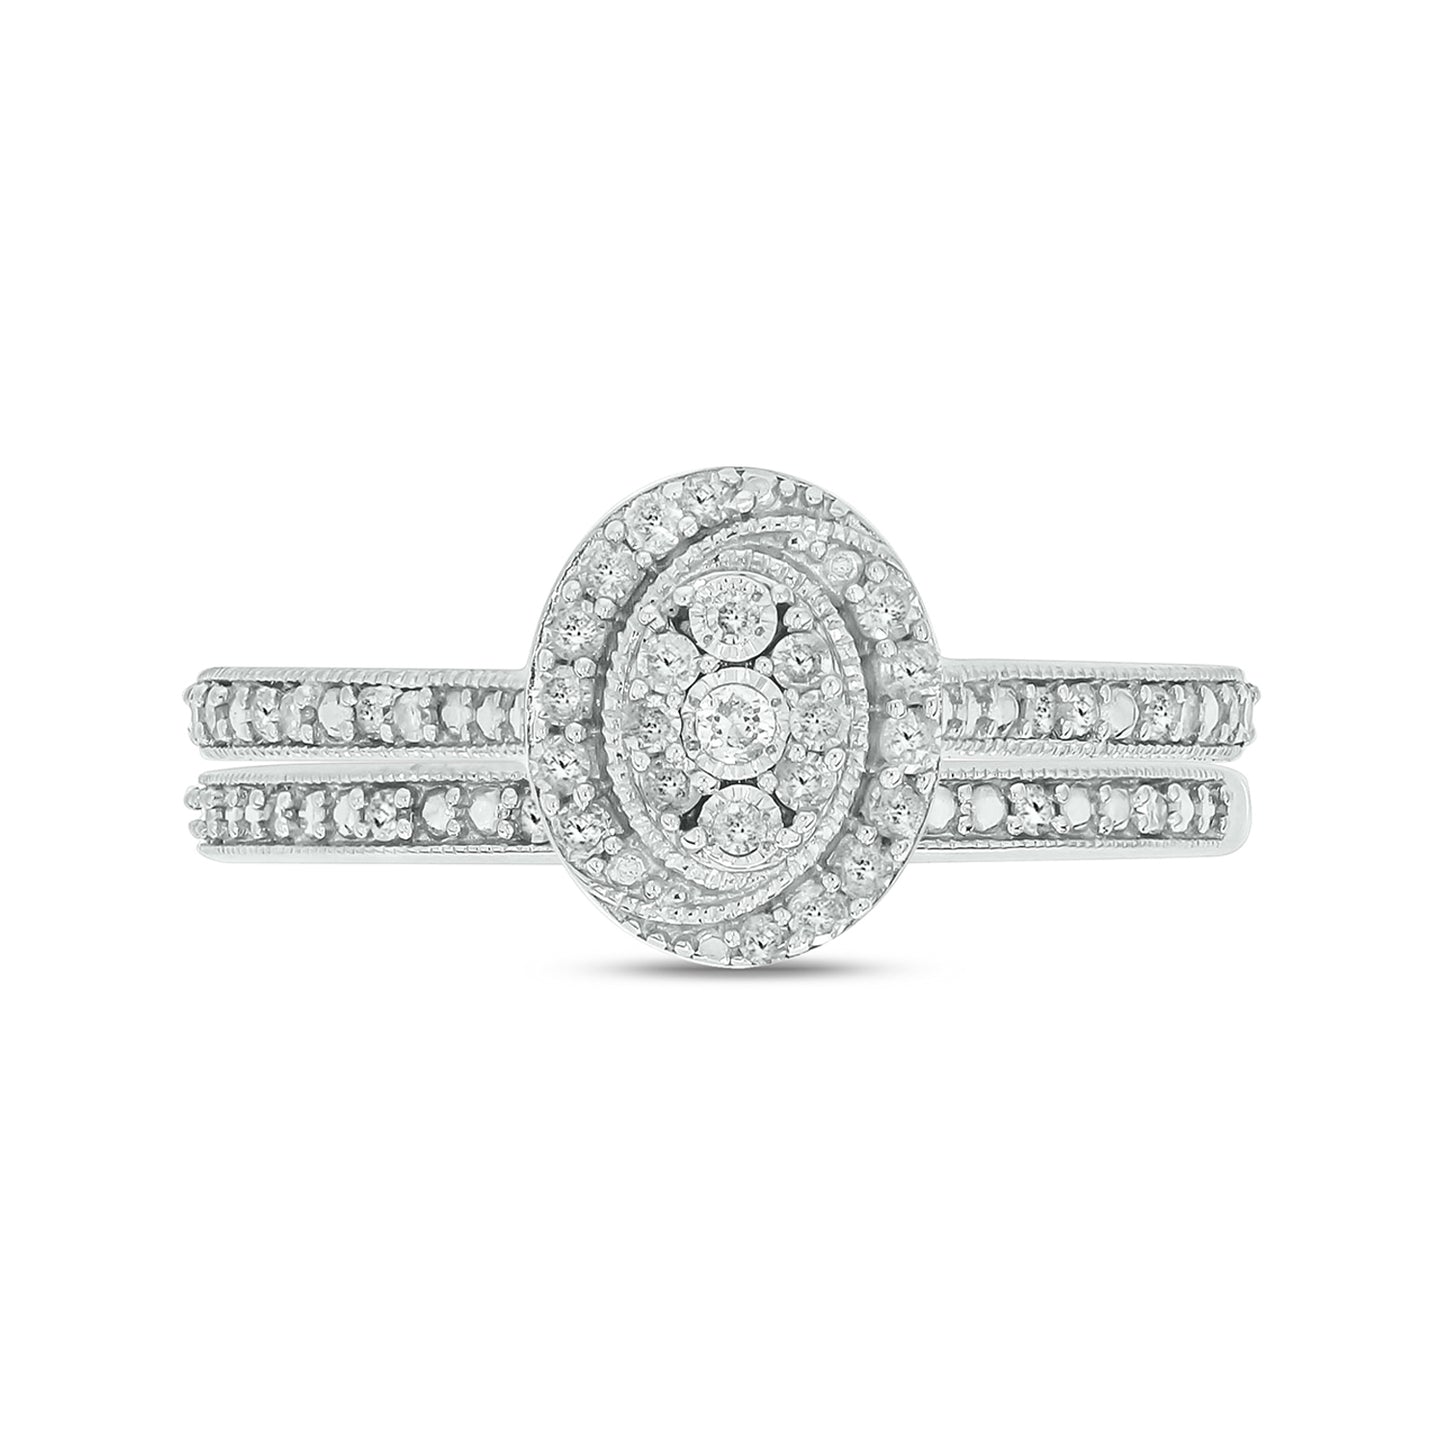 Exquisite Oval Bridal Ring Set in Sterling Silver, Authentic Natural Diamonds